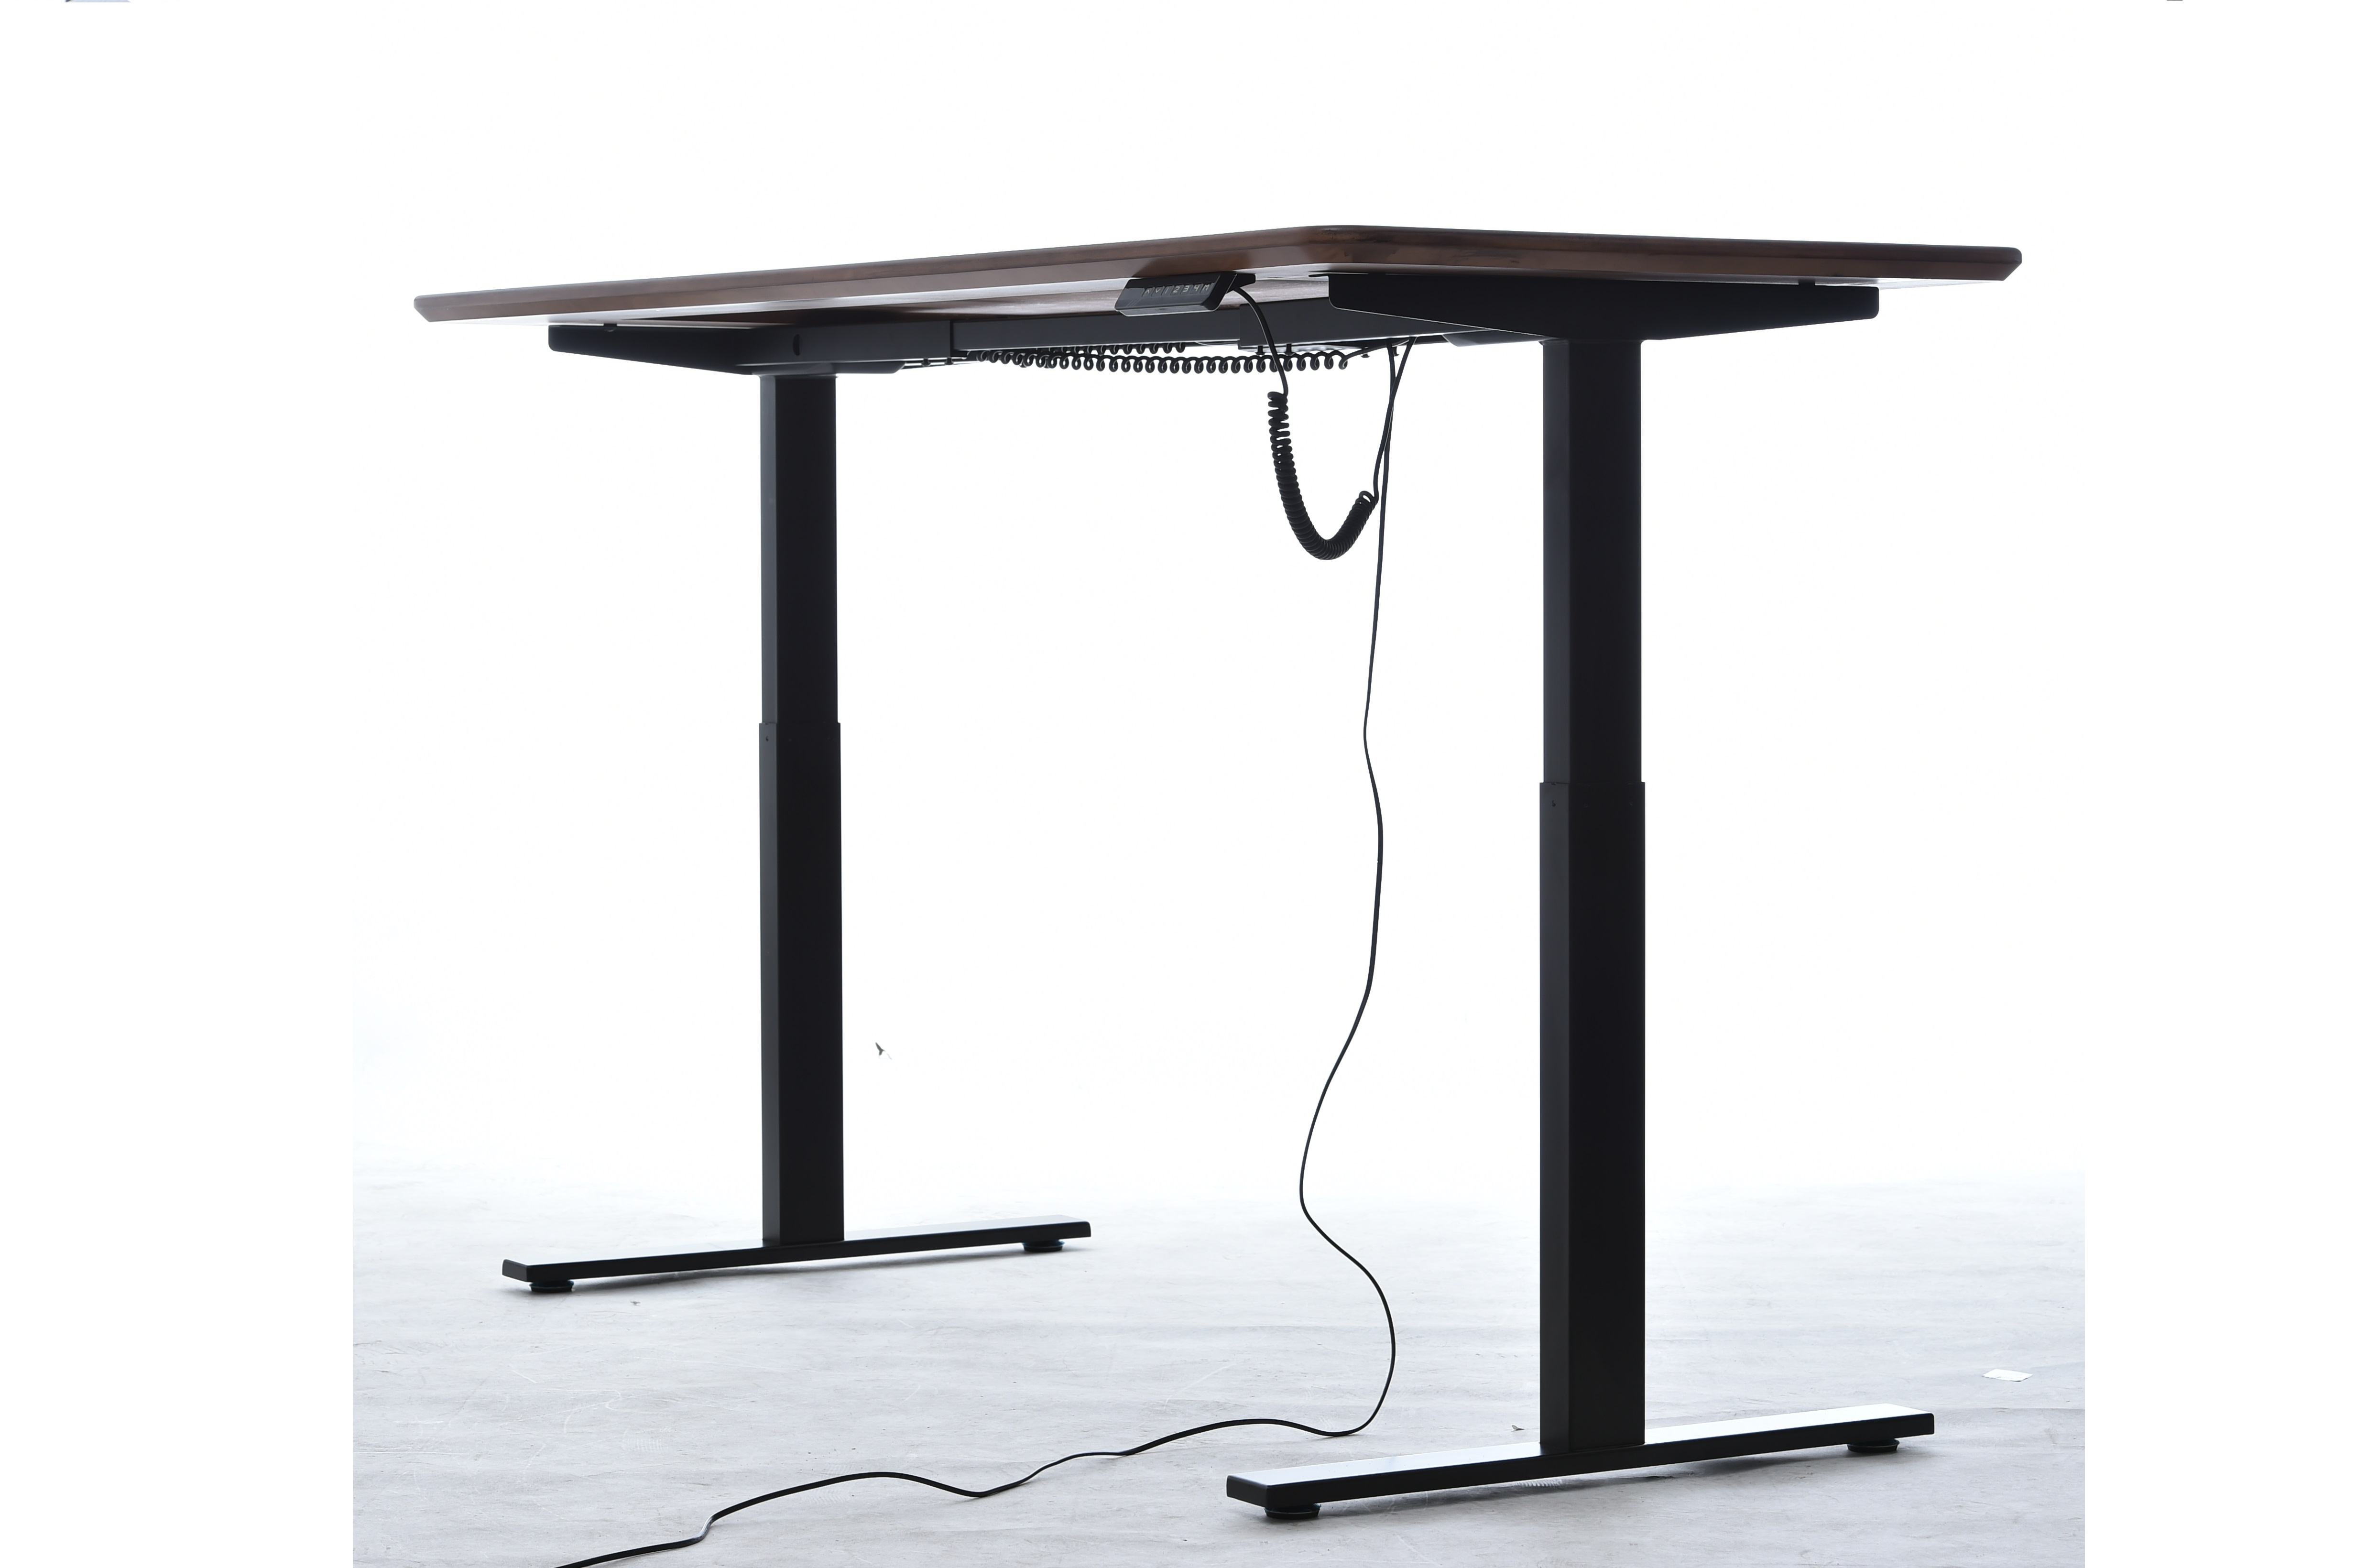 SMART LIFT LIGHT DESK ASED desk with 2 lifting segments and 1 mo